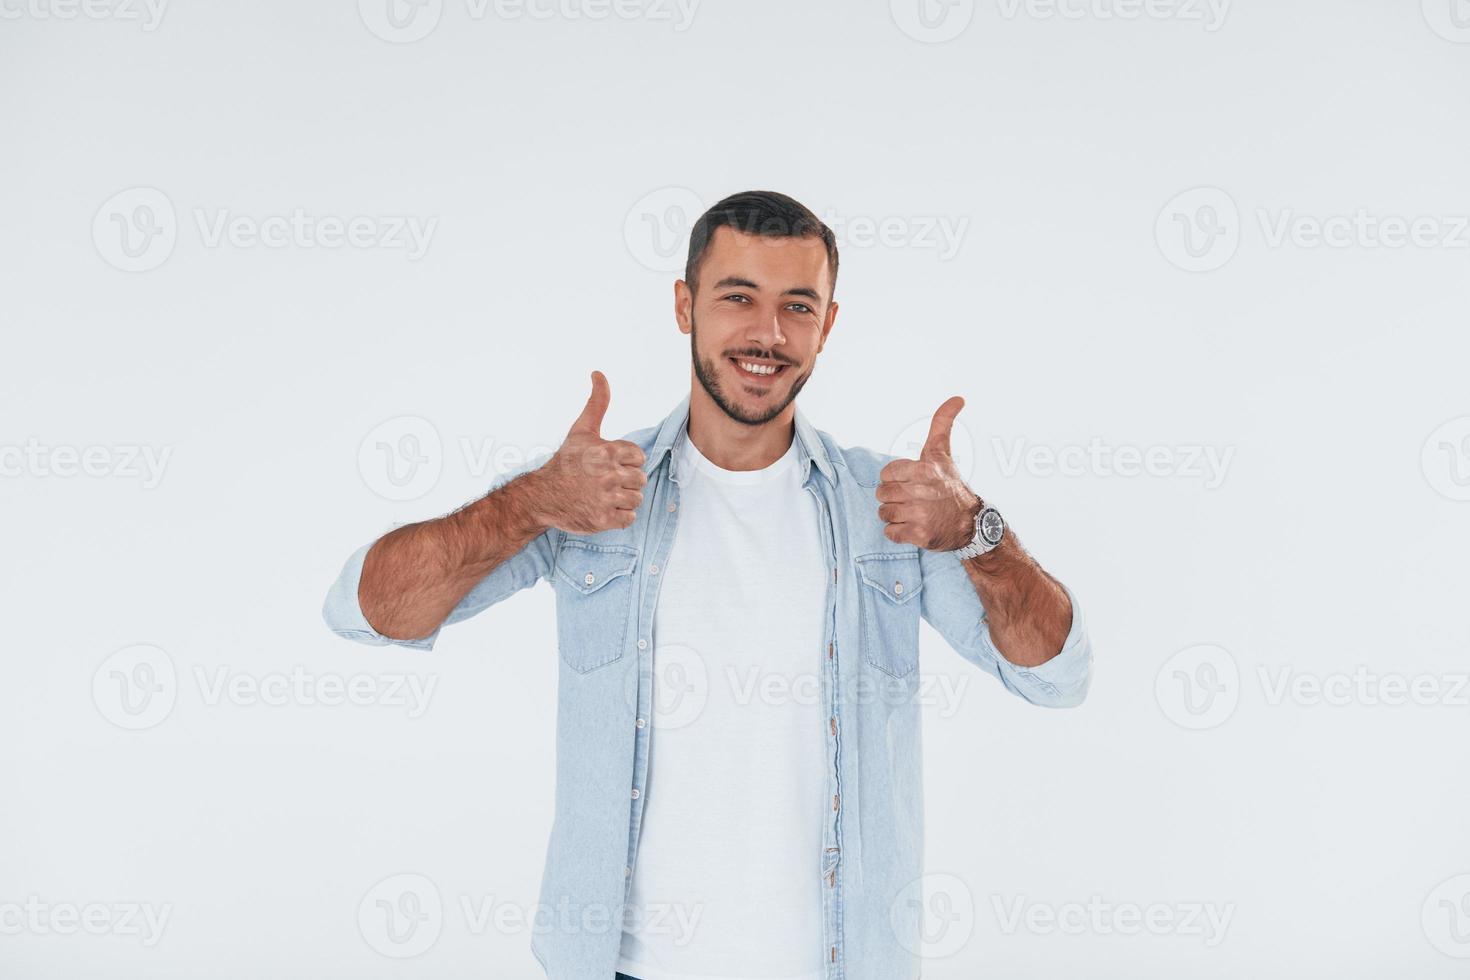 Thumbs up. Young handsome man standing indoors against white background photo